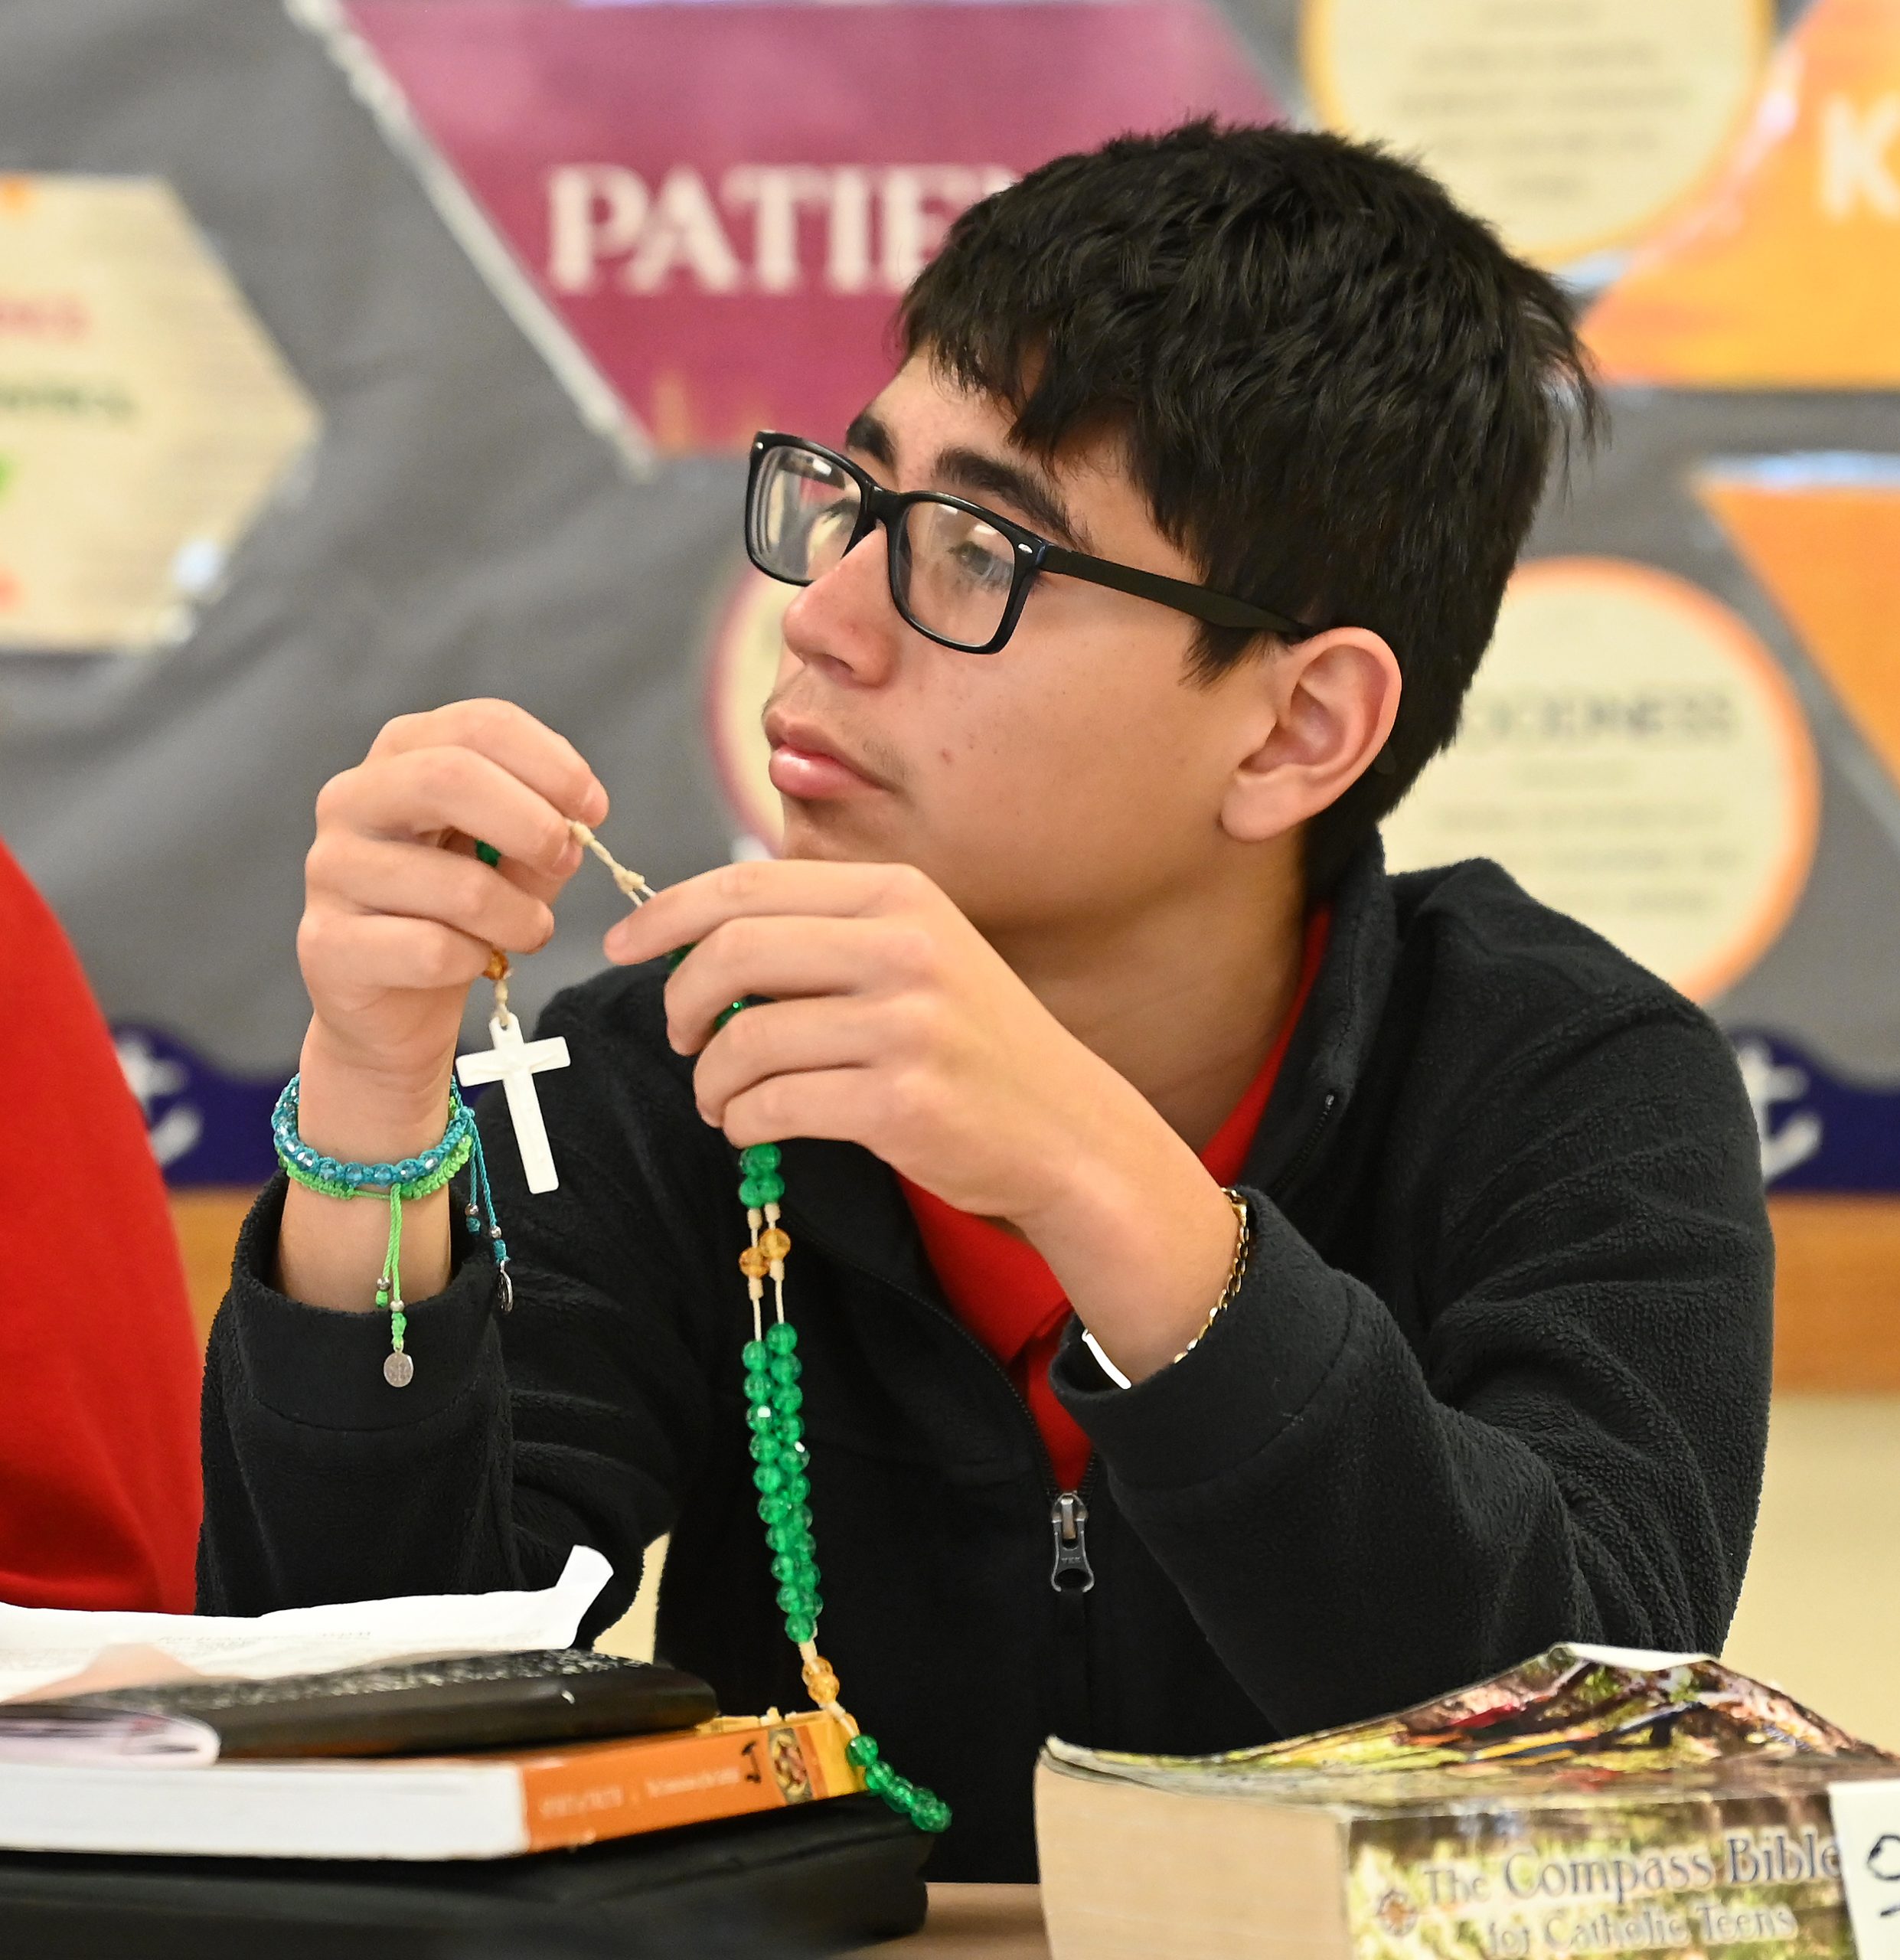 Student listens intently while holding a rosary.